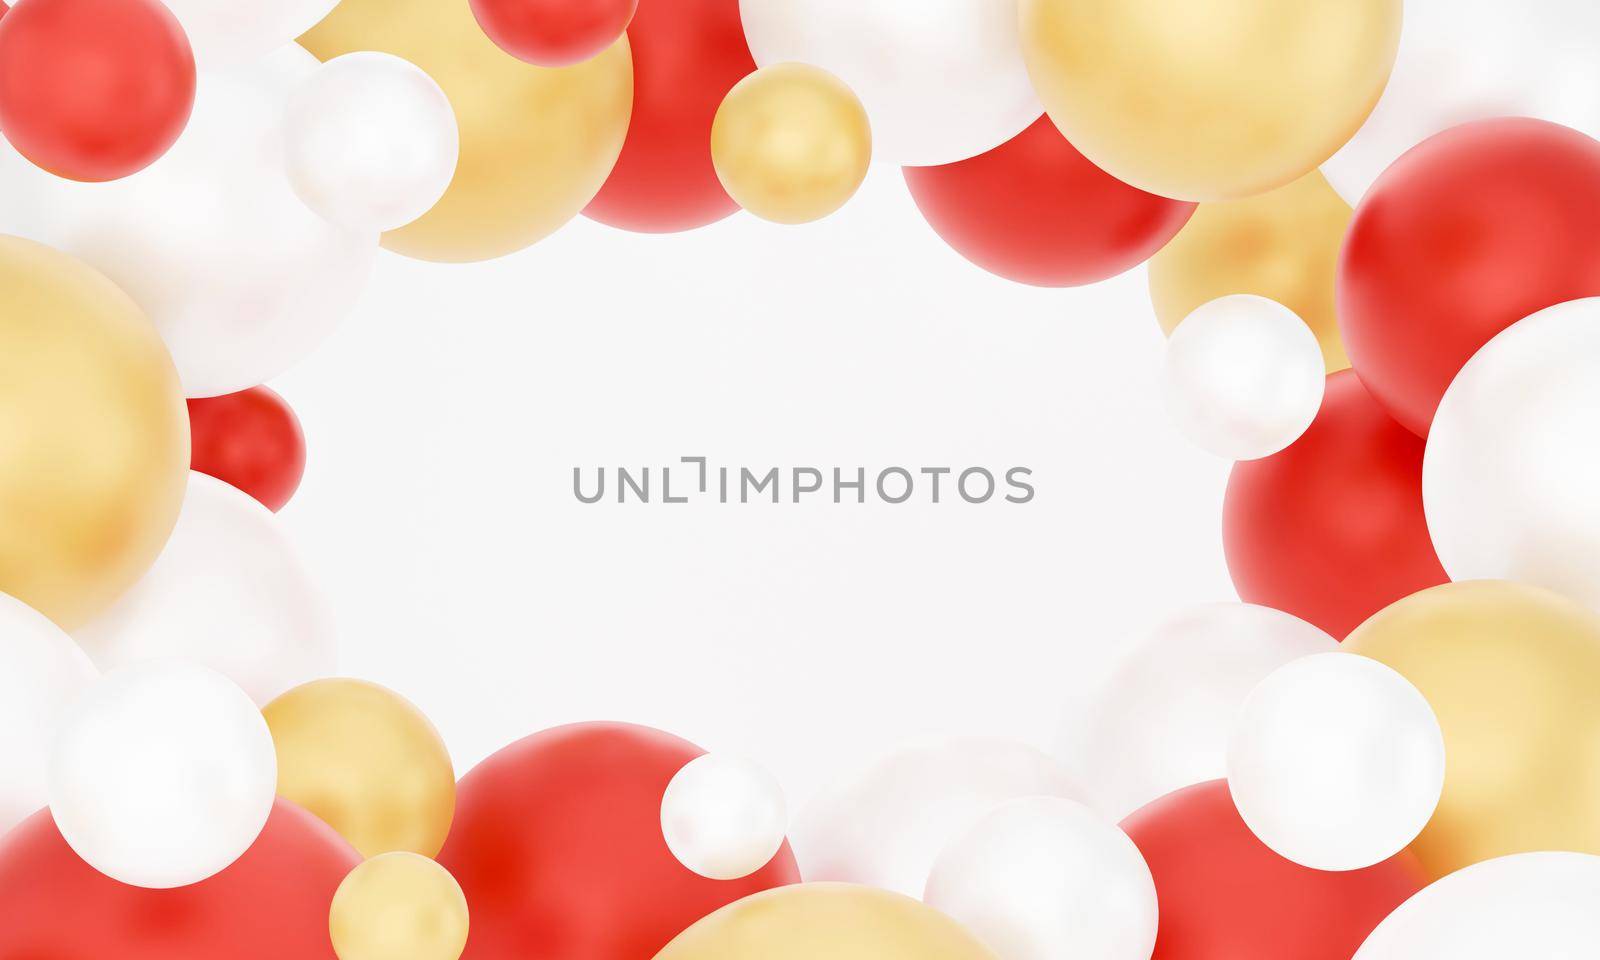 3d render abstract background frame with gold, red and white balls. multicolored balloons, geometric background, primitive shapes, minimalistic design, party decoration, plastic toys